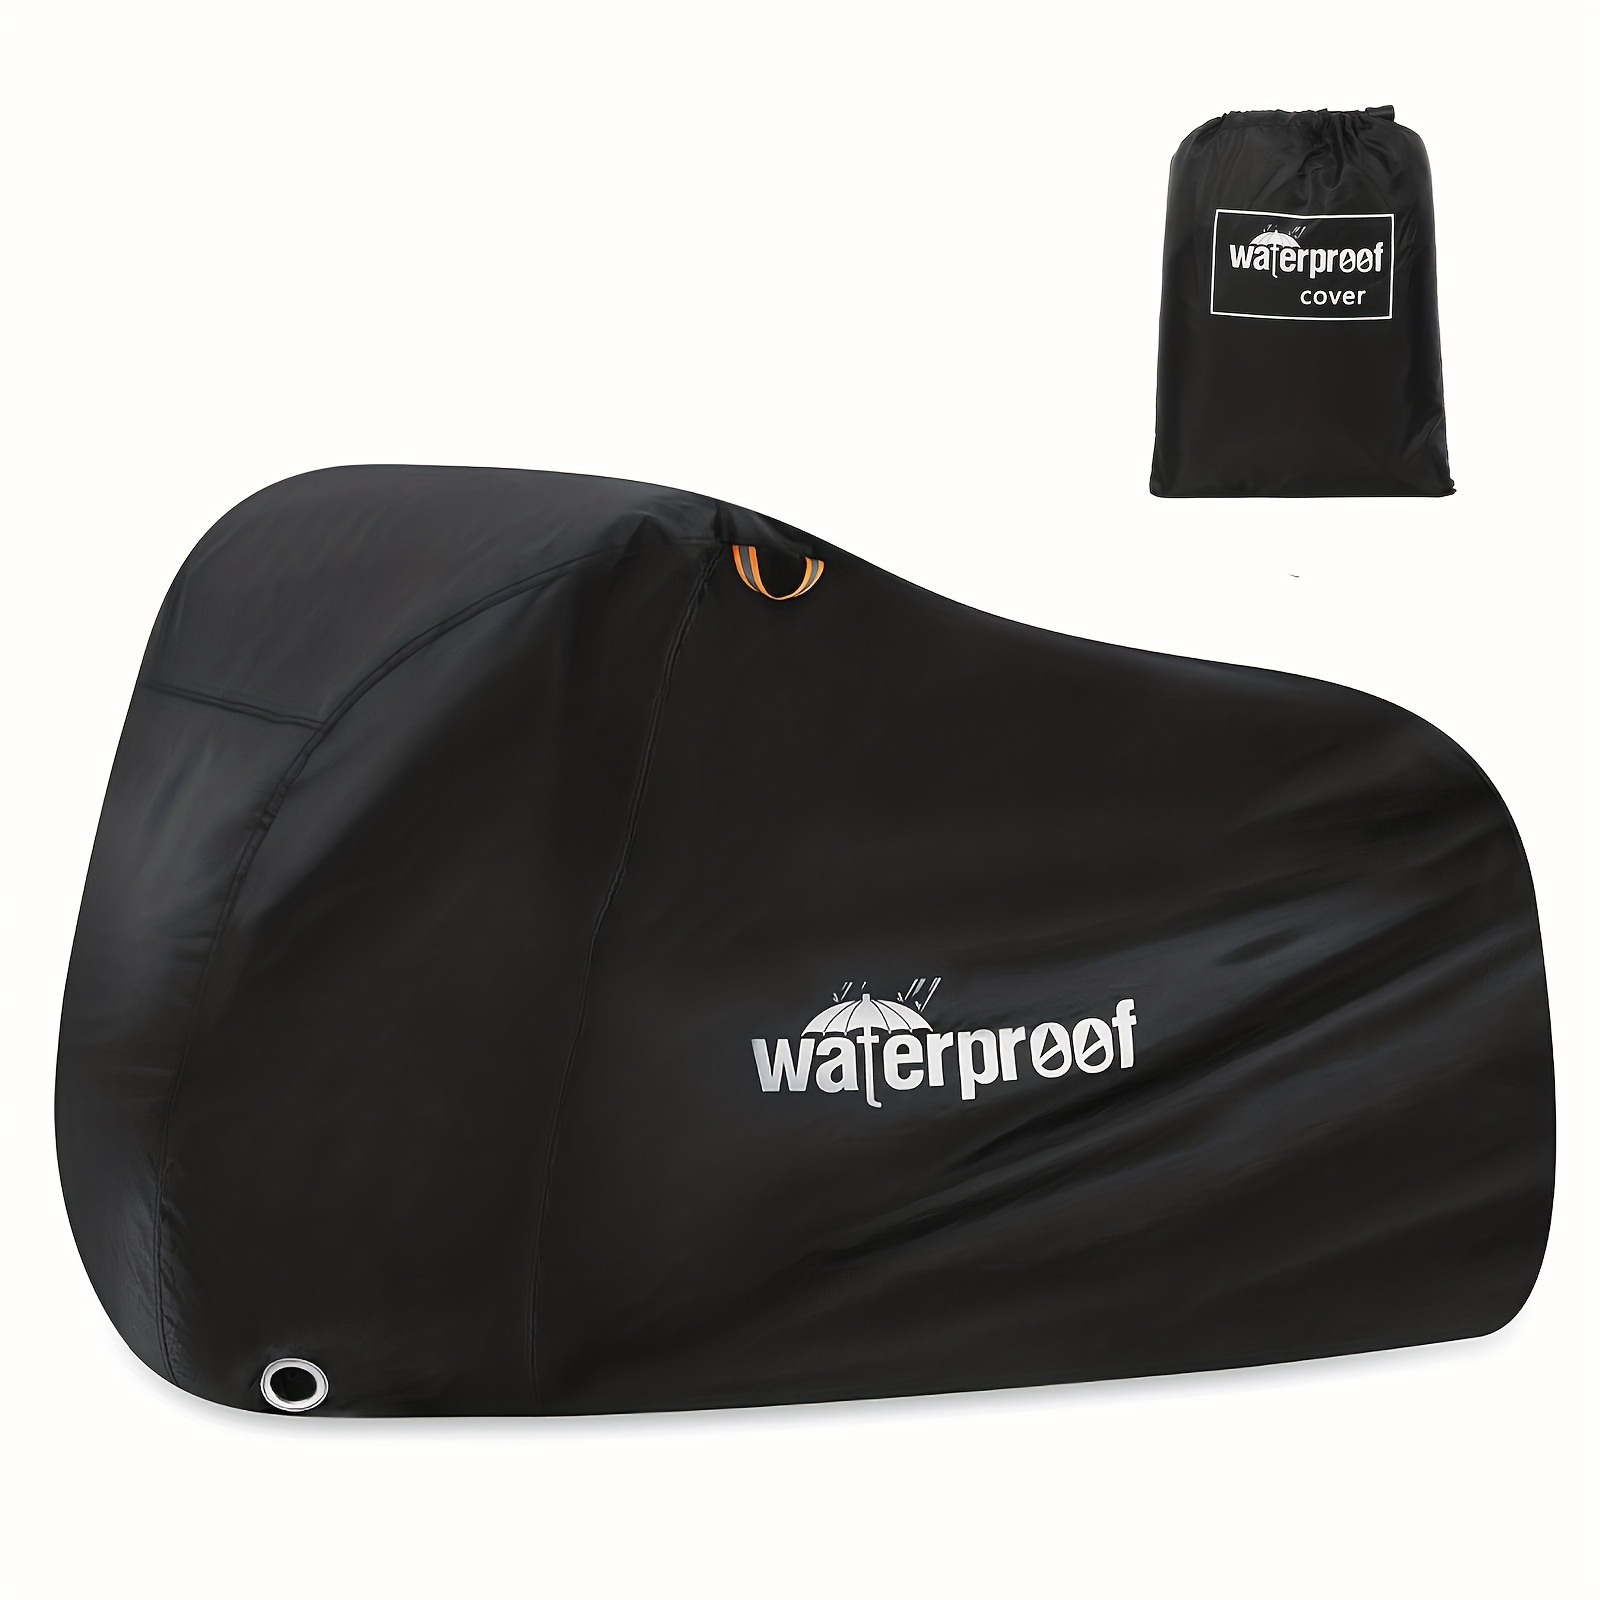 

1pc Waterproof Bike Cover For 1-2 Bikes - Protect Your Mountain, Road, Or Electric Bike From Rain, Sun, And Dust